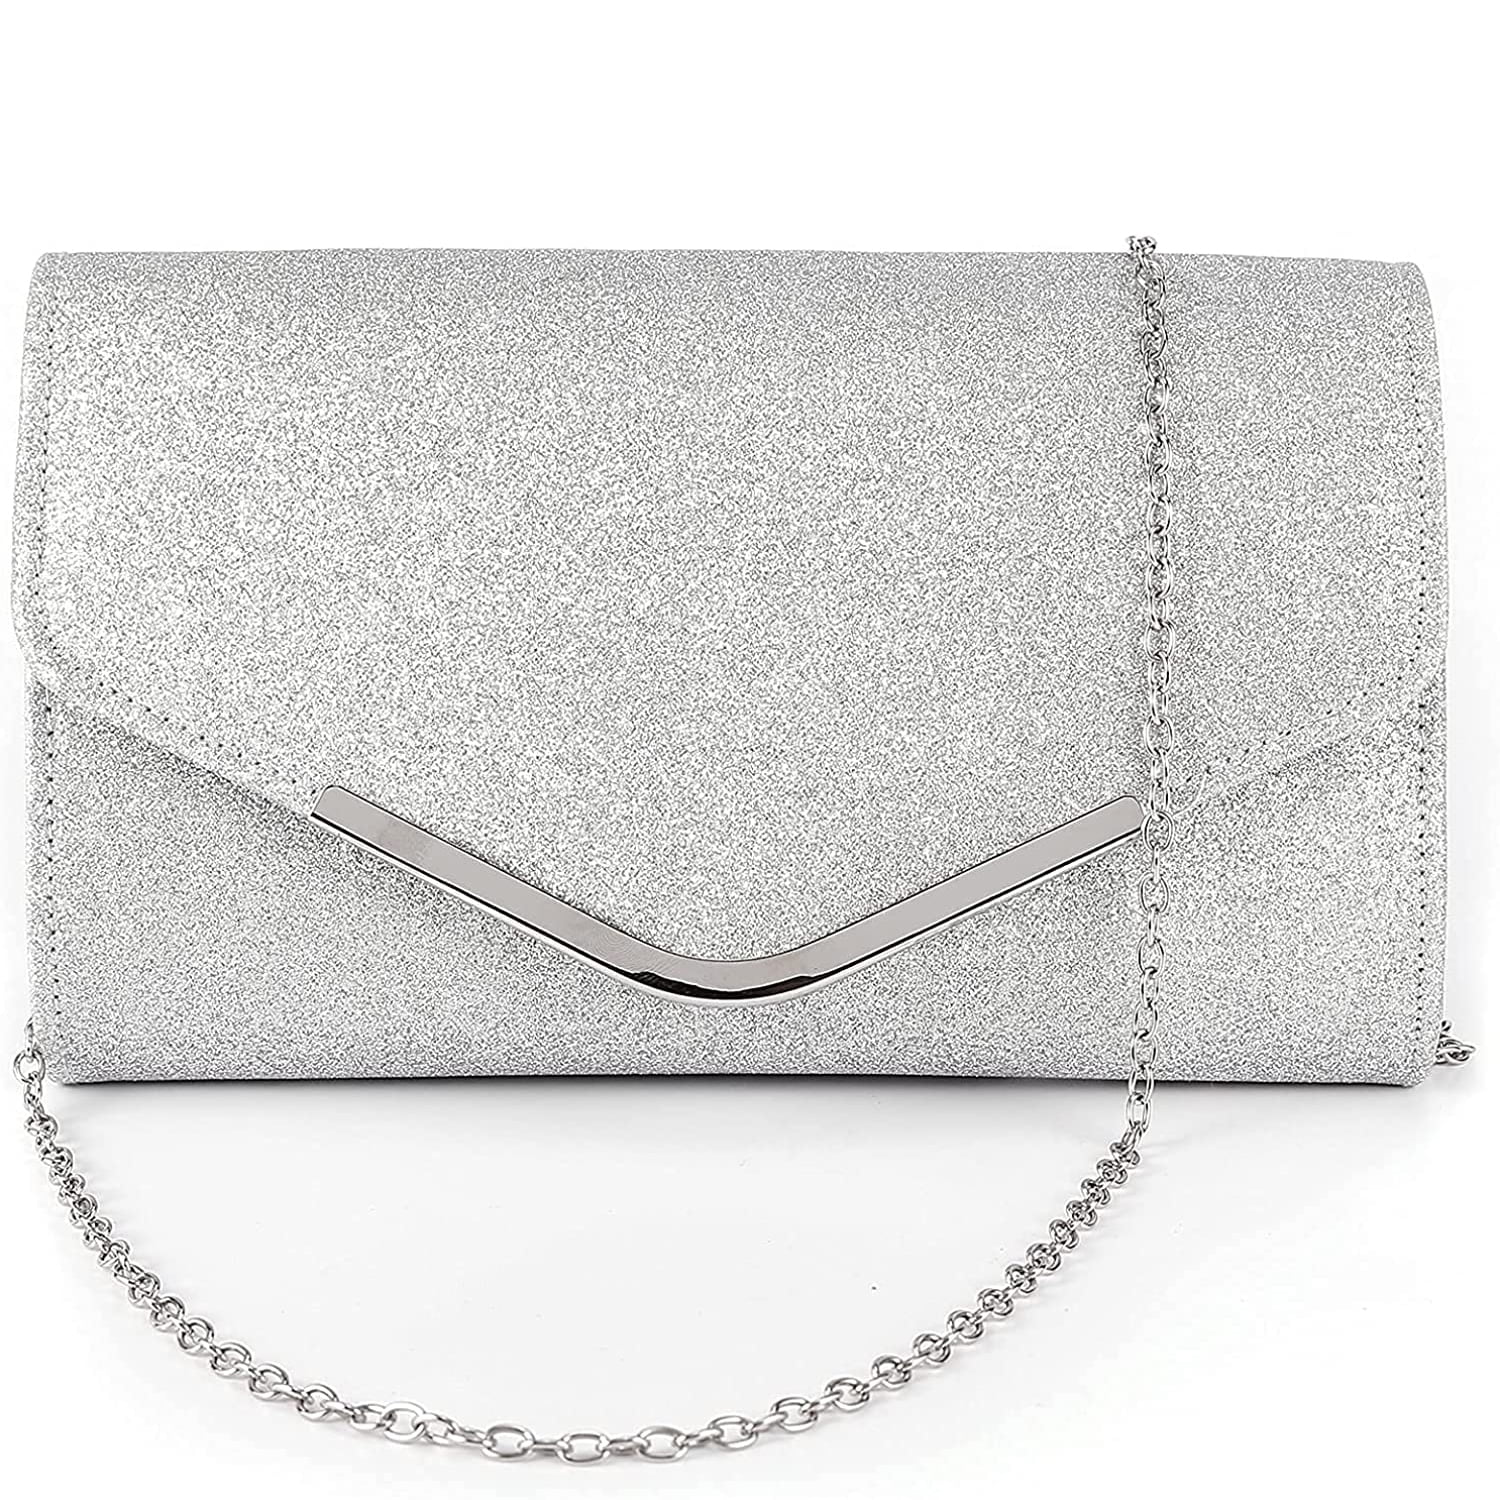 Women's Crystal Clutch Purse and Handbag Silver Diamond Evening Clutch Bag  for Wedding Party Small Chain Shoulder Bag ZD2156